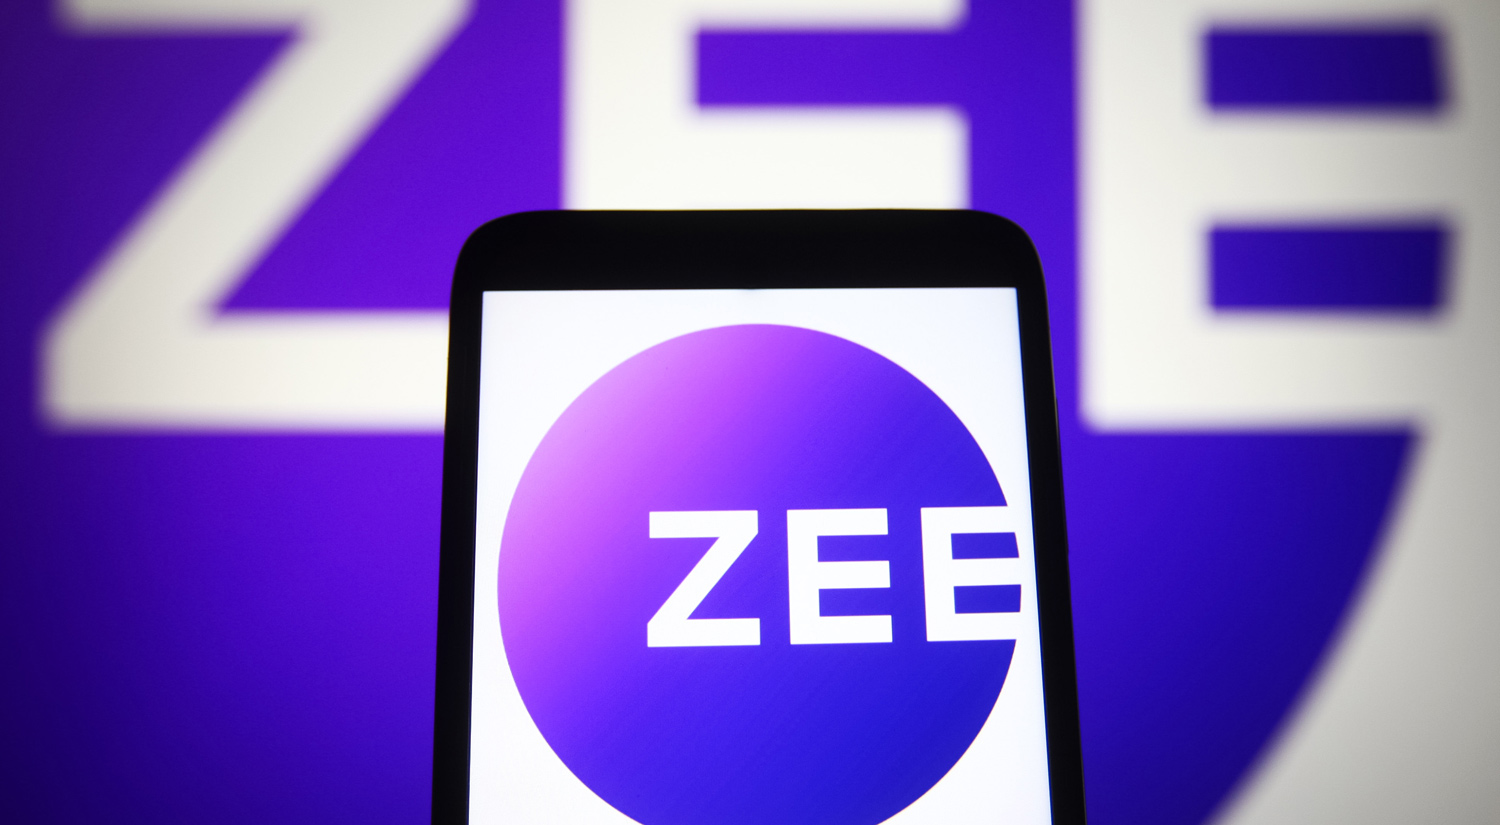 Invesco Says Zee Founders Explored Deal with Reliance - Bloomberg